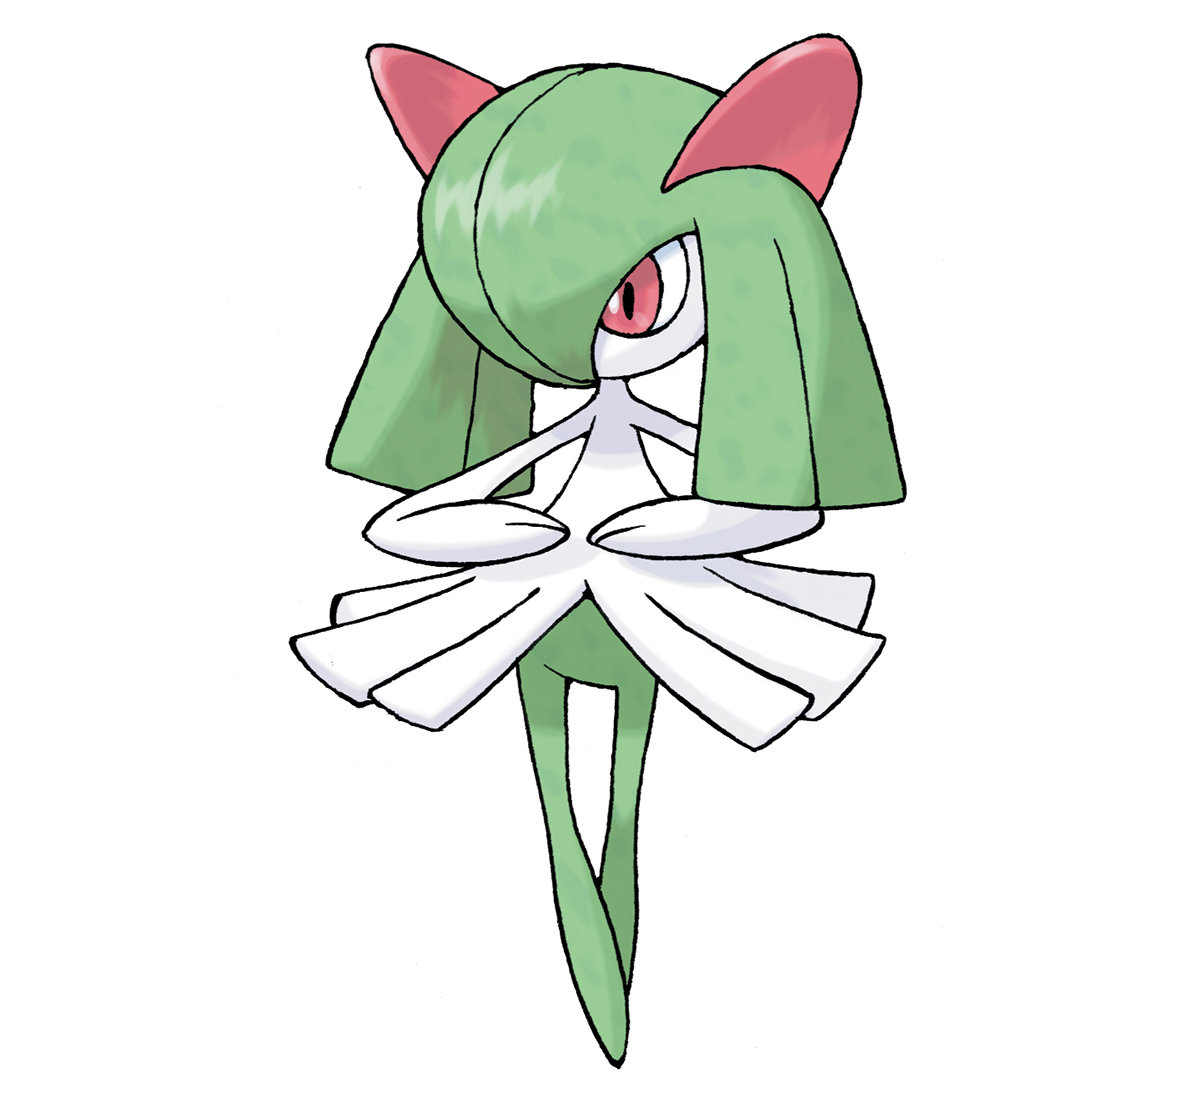 http://images2.wikia.nocookie.net/__cb20080910095310/es.pokemon/images/2/25/Kirlia.png